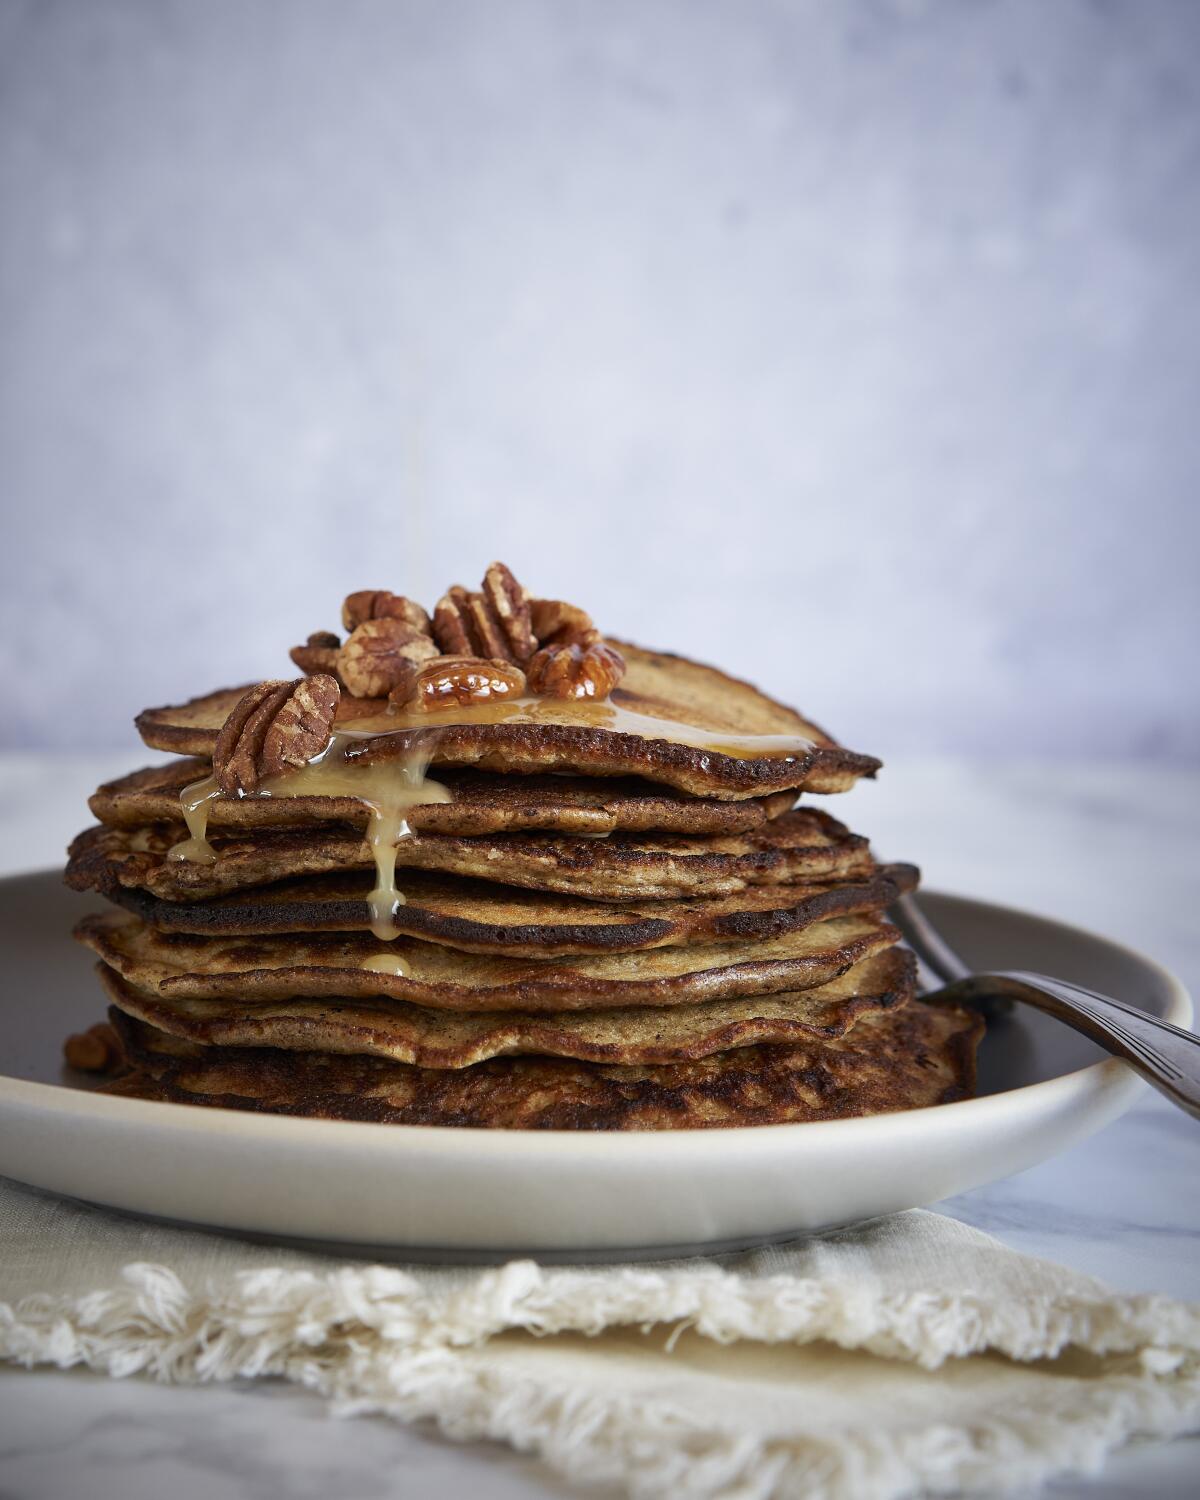 pecan pancakes from "for appropriate measures".